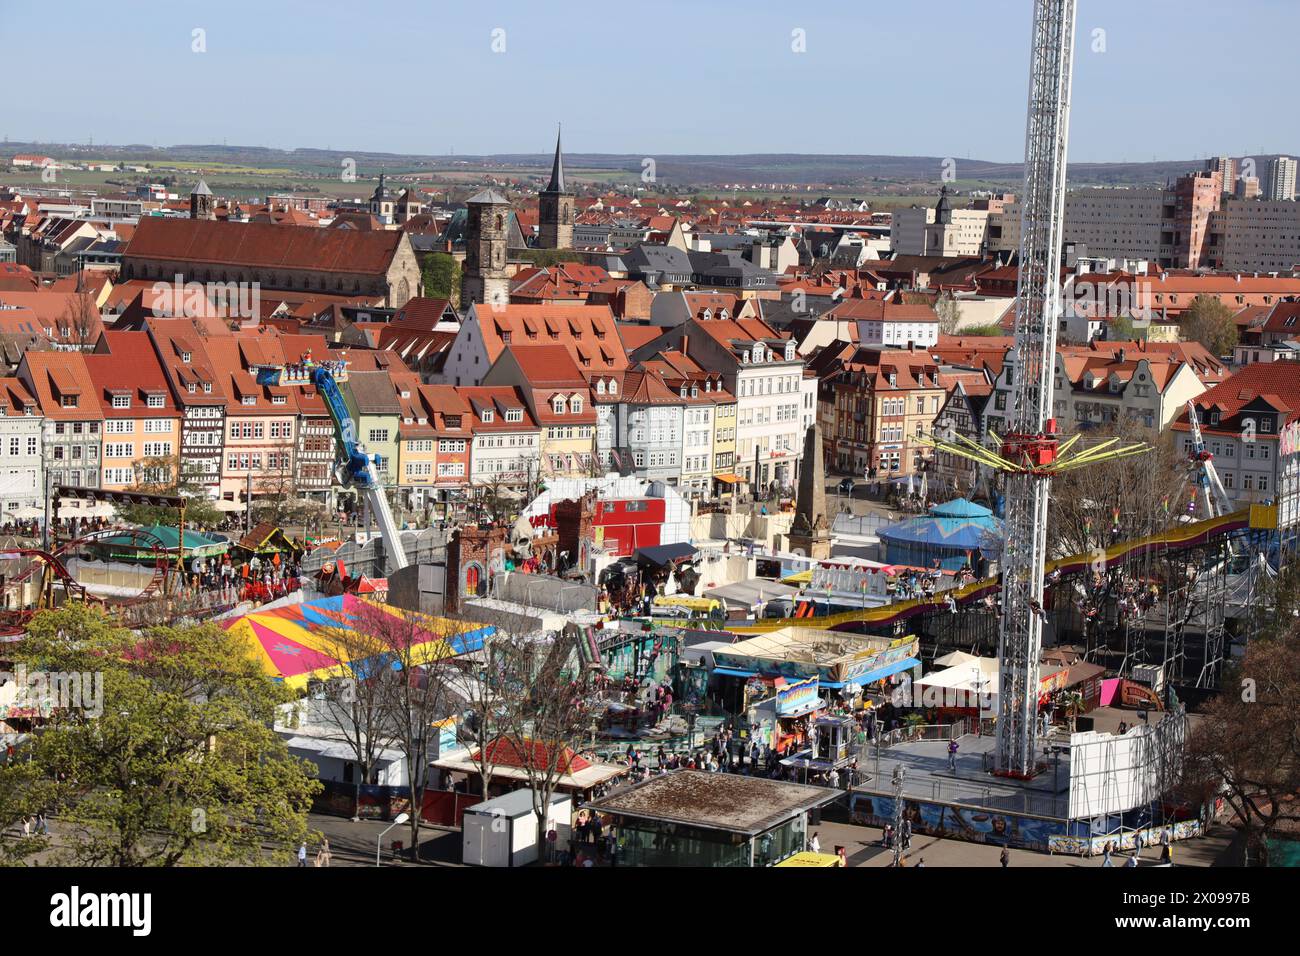 An aerial view of Erfurt city showing a festival where many people gather, playing thrilling rides, flips, and swings, enjoying a fun time in the sun. Stock Photo